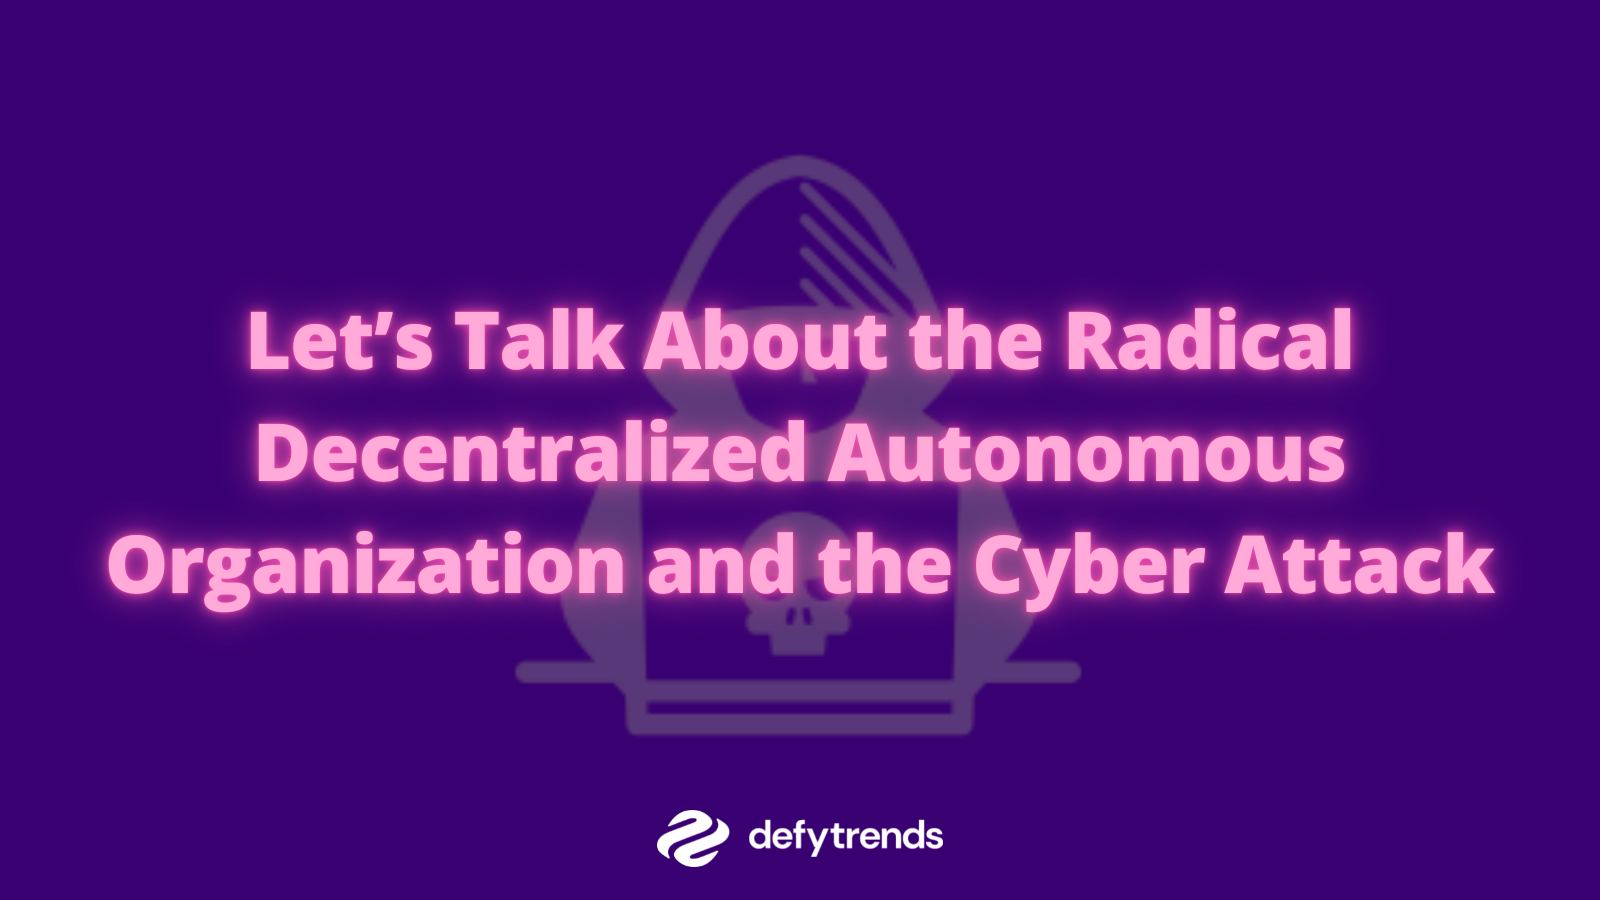 Let’s Talk About the Radical Decentralized Autonomous Organization and the Cyber Attack